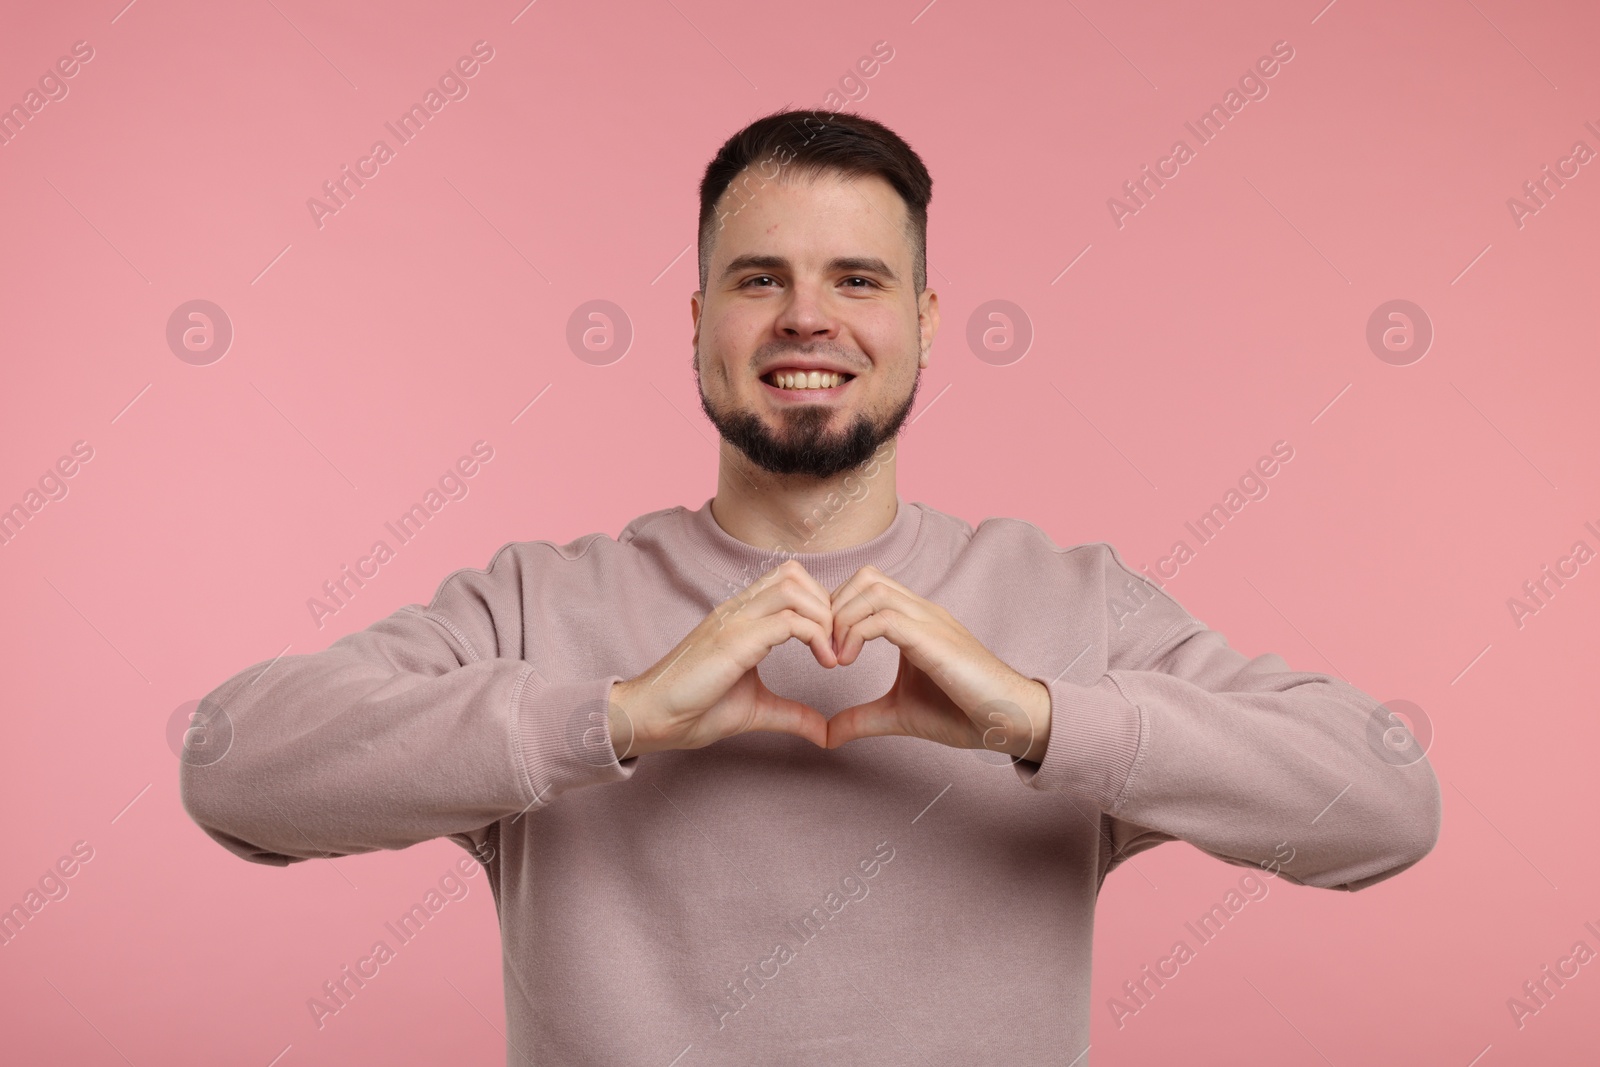 Photo of Man showing heart gesture with hands on pink background